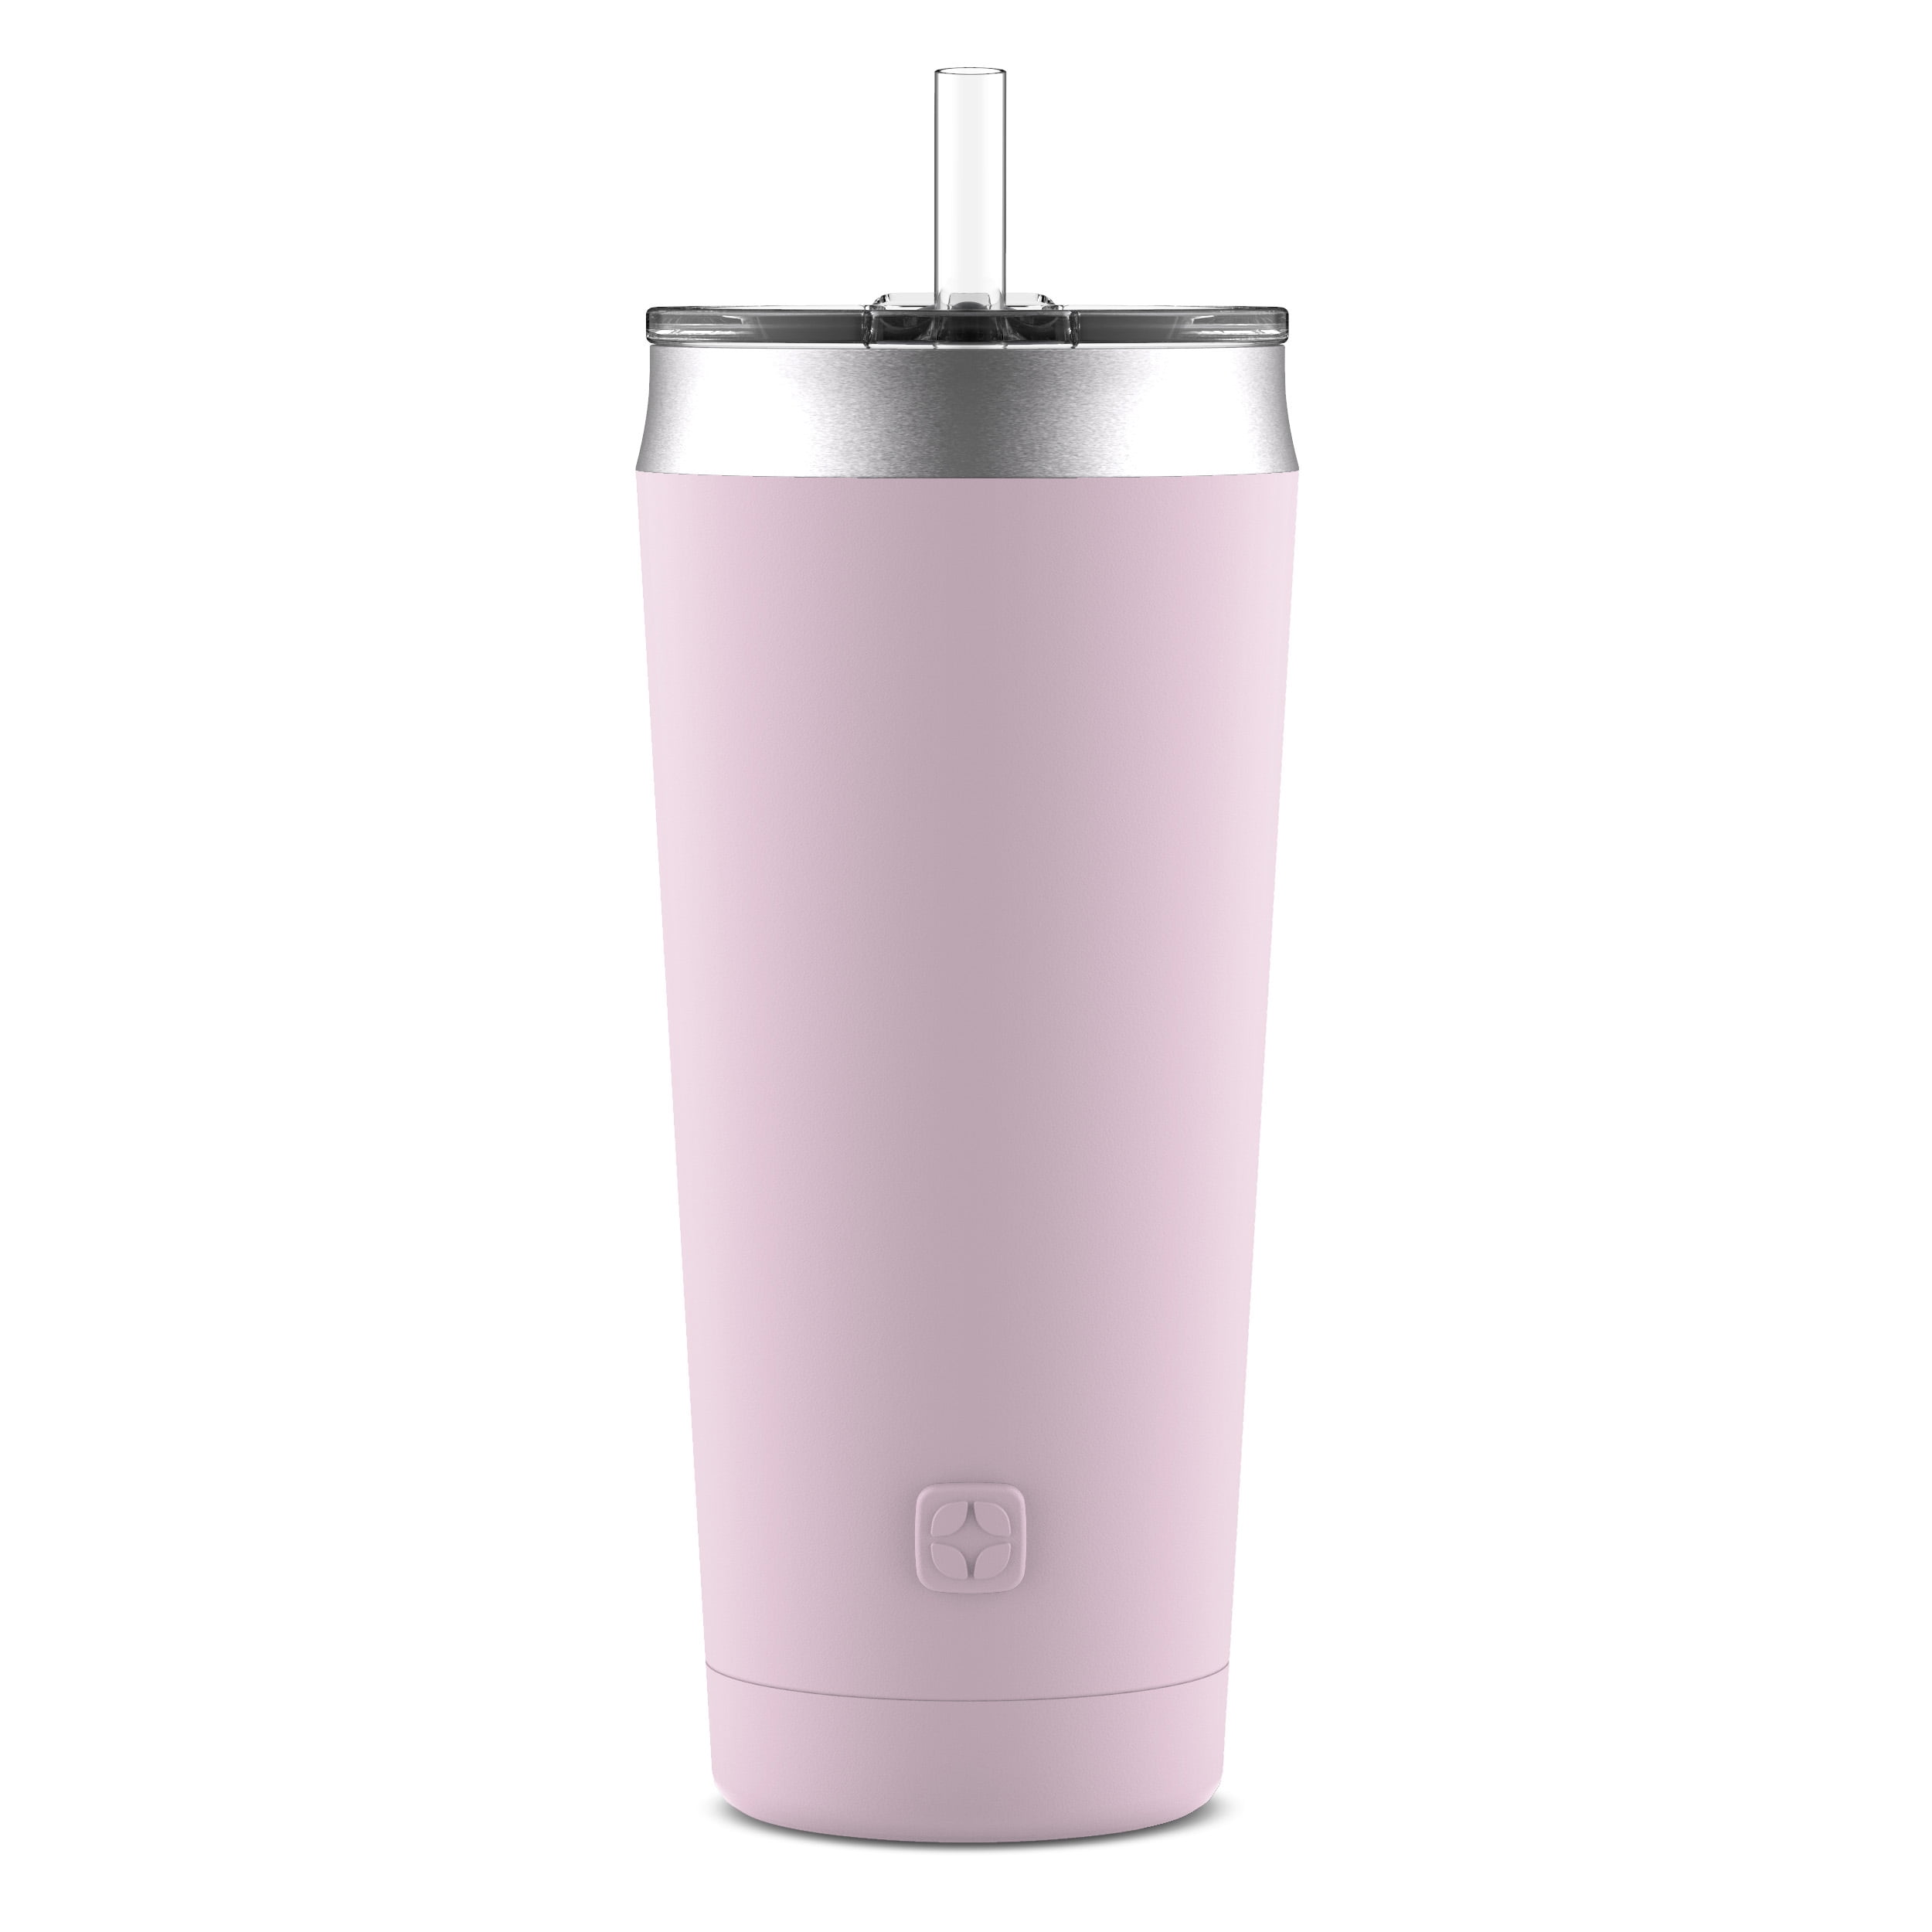 Ello Beacon Vacuum Insulated Stainless Steel Tumbler, Cashmere Pink, 24 oz.  